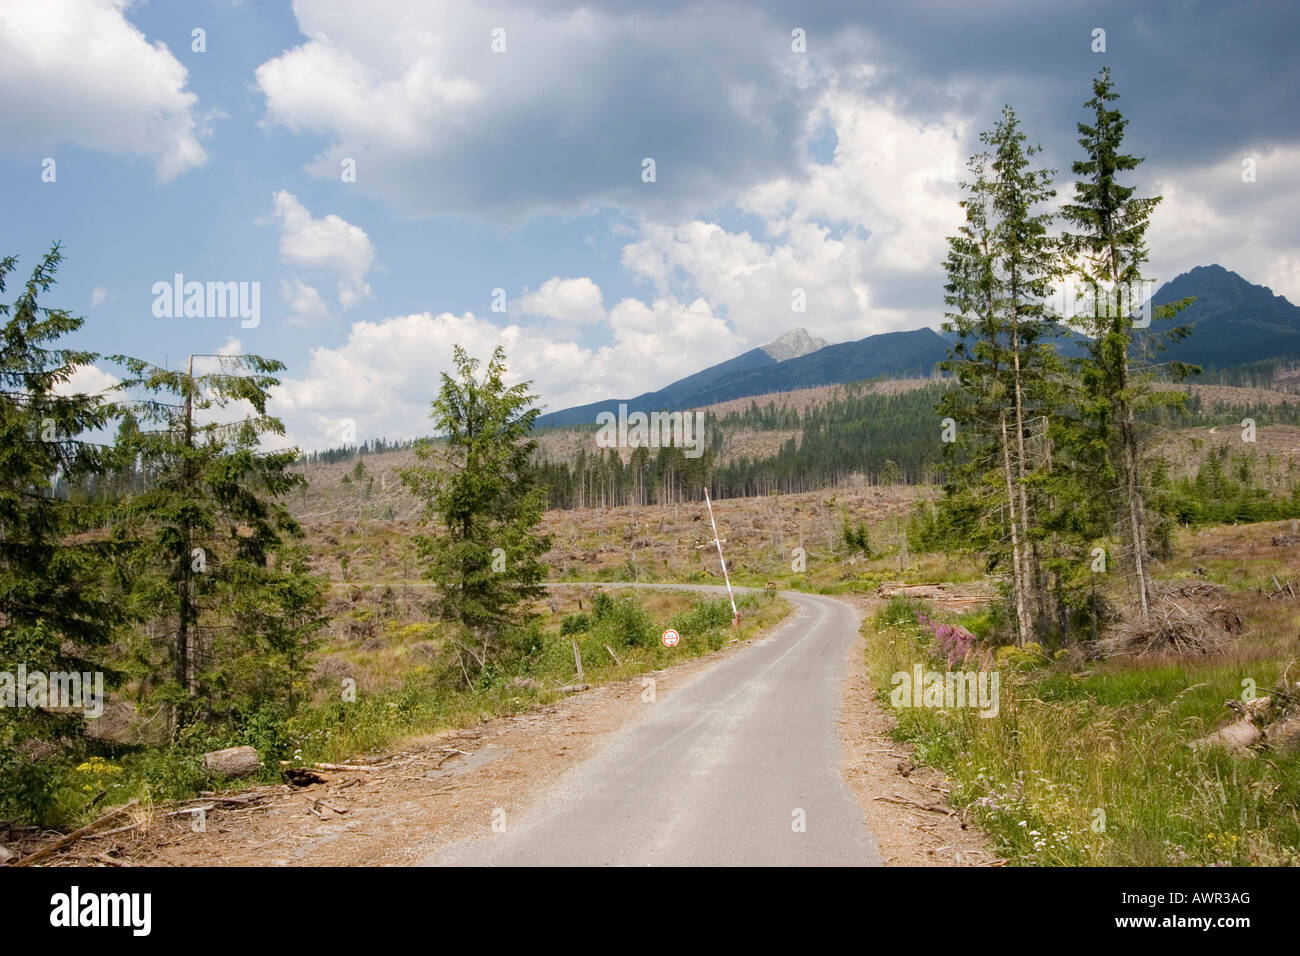 Hurricane damage on the Slovakian side of the High Tatras, almost half of the trees were destroyed by a hurricane on the 19th o Stock Photo